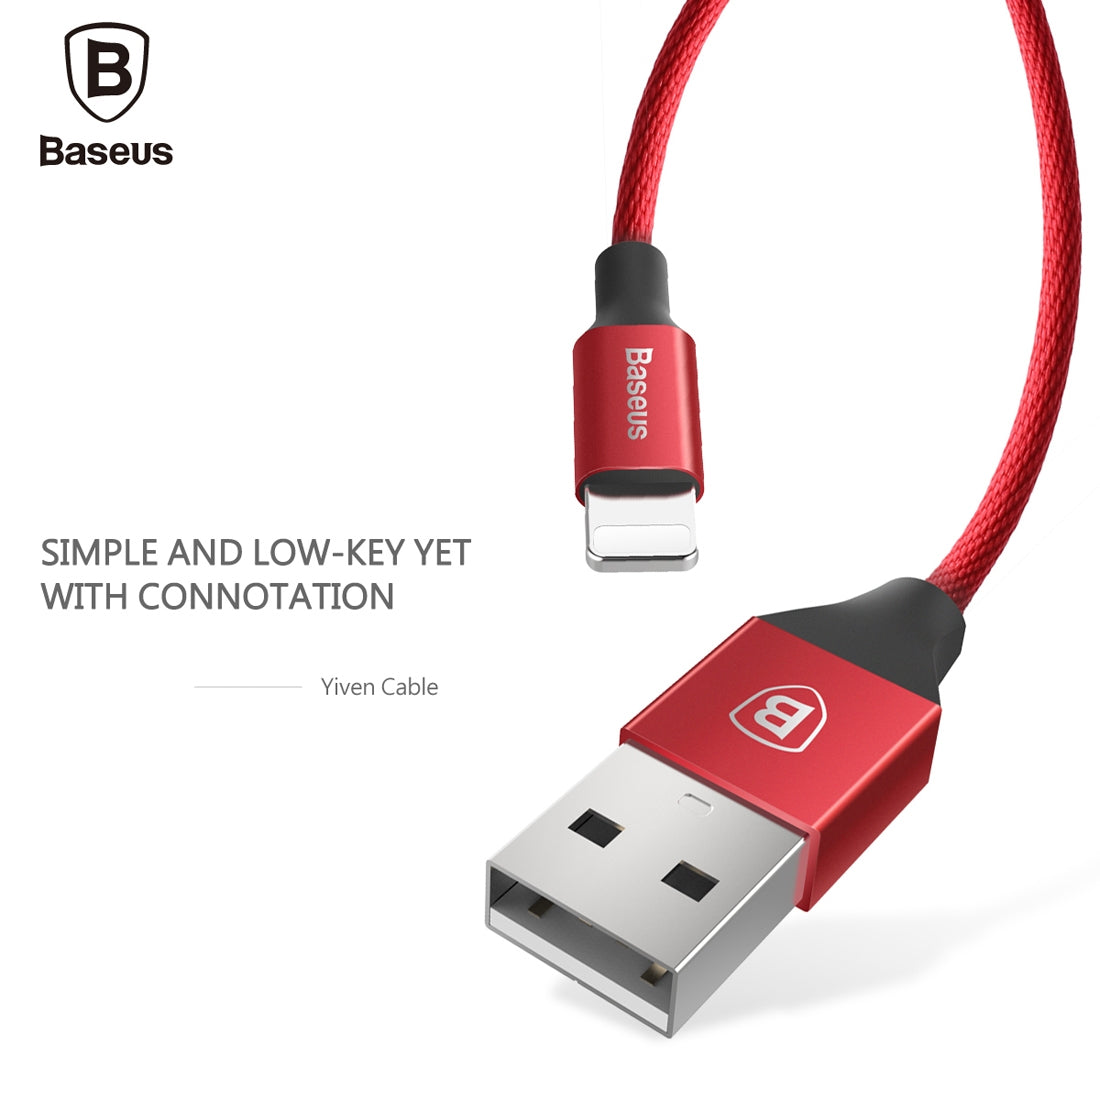 Baseus 1.8m 2A Yiven Cable Woven Style Metal Head 8 Pin to USB Data Sync Charging Cable for iPhone & iPad & iPod(Red)